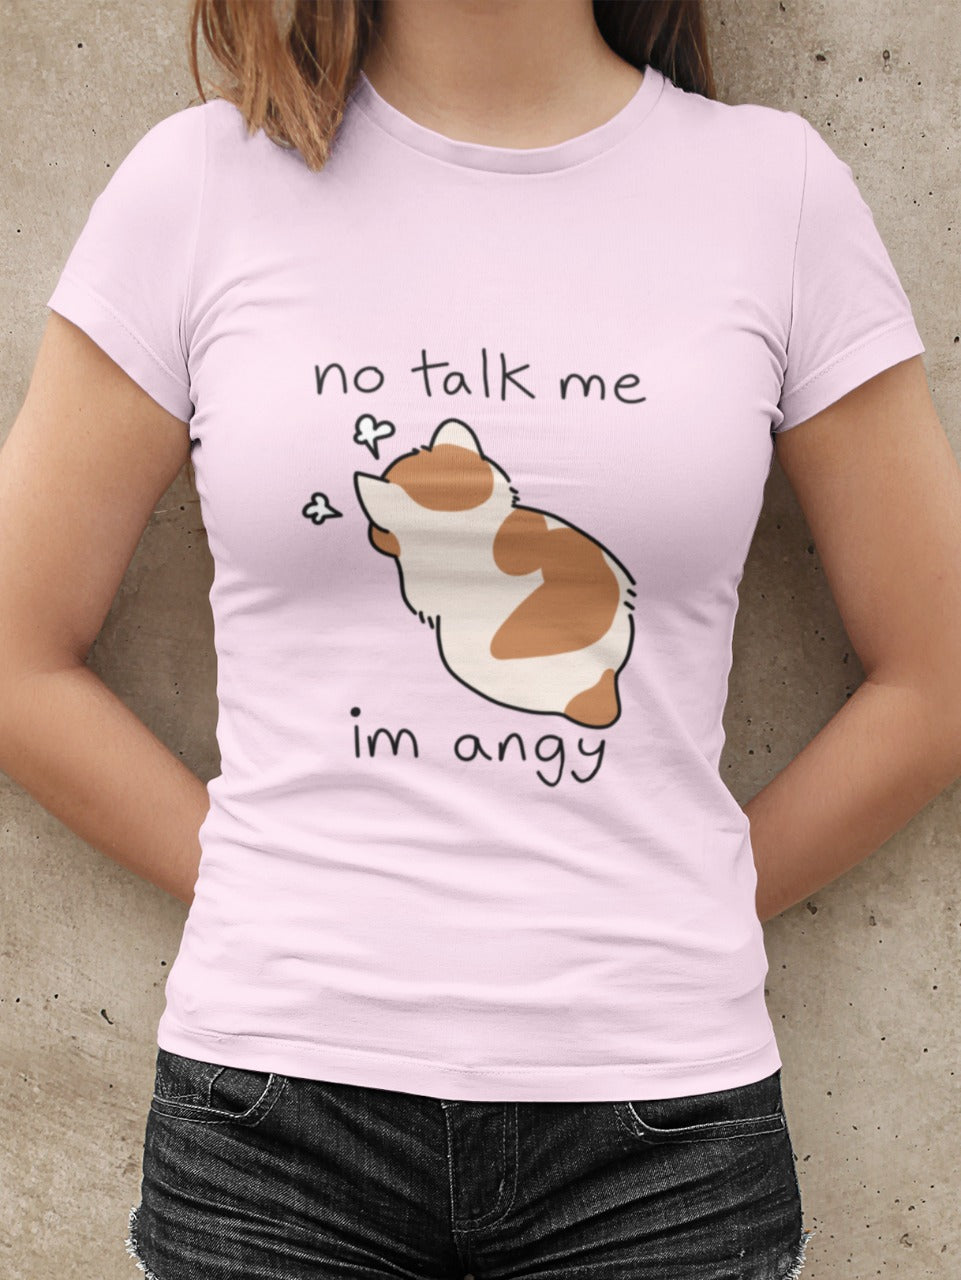 Girl wearing a baby pink tshirt with No talk me I'm angy written on it with a cute white and brown angry cat in the middle, facing away with 2 clouds showing frustration, funny meme